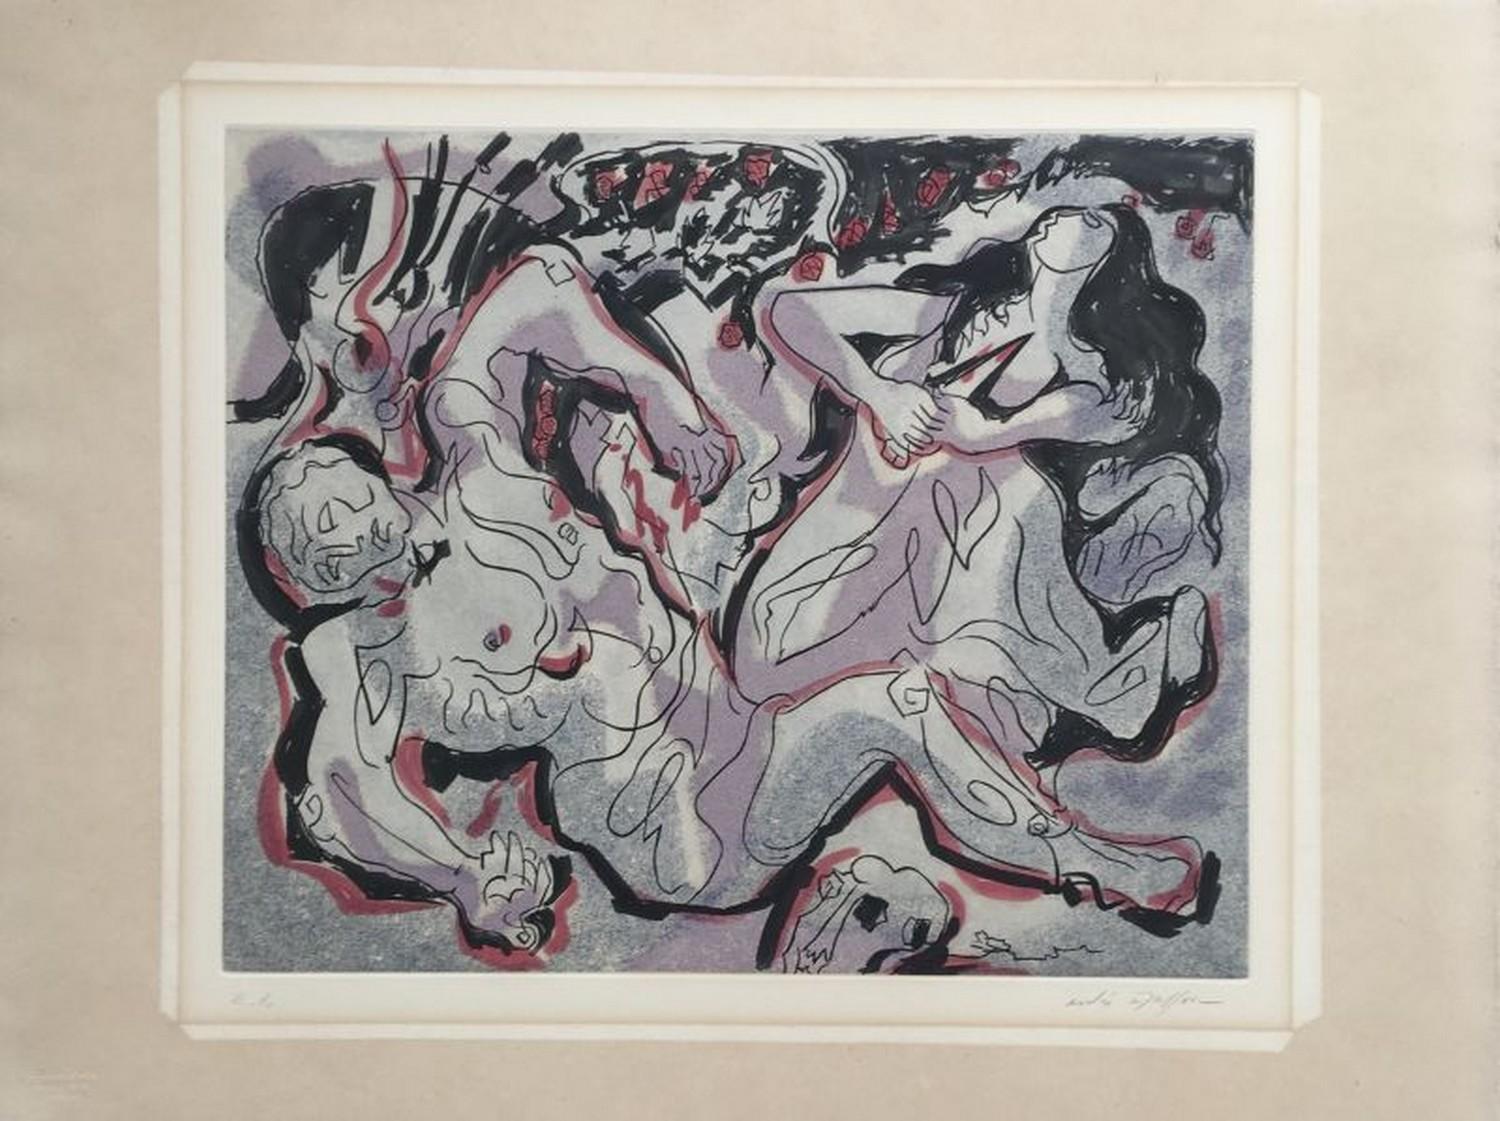 André Masson Abstract Print - No title